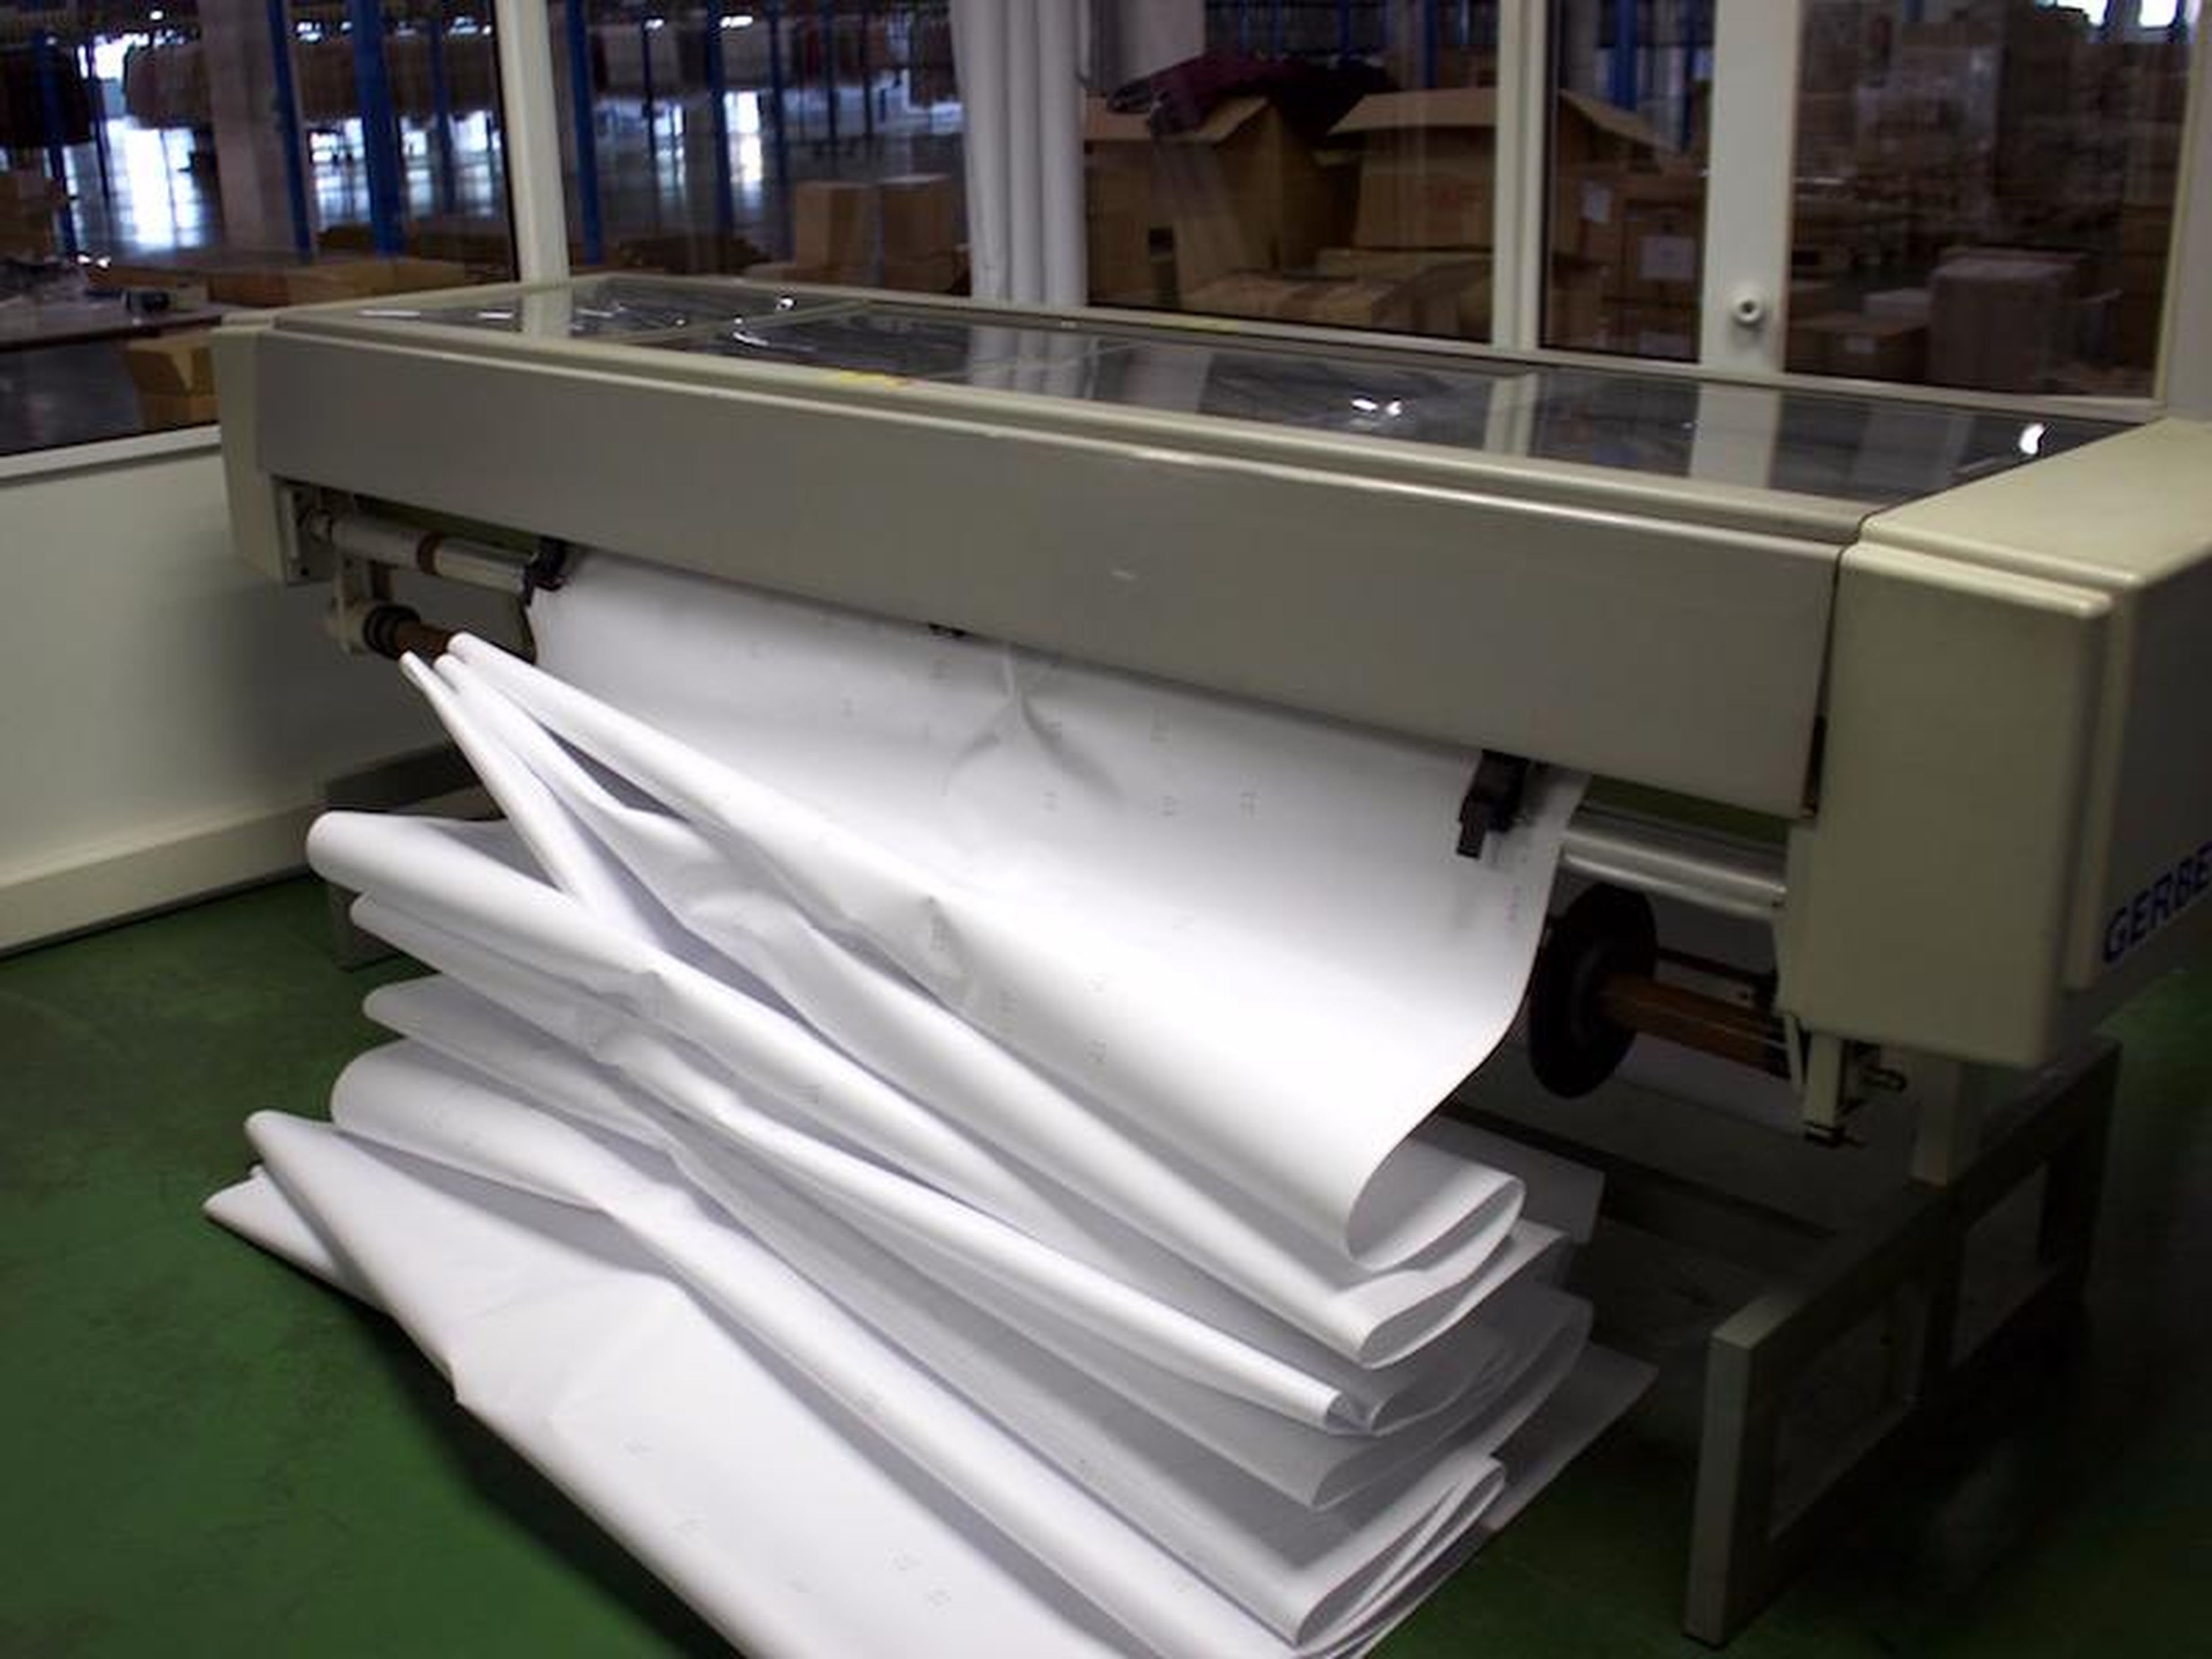 The pattern layout is then sent to a machine that prints a life-size copy, using the relevant information about what part of the garment each piece is.